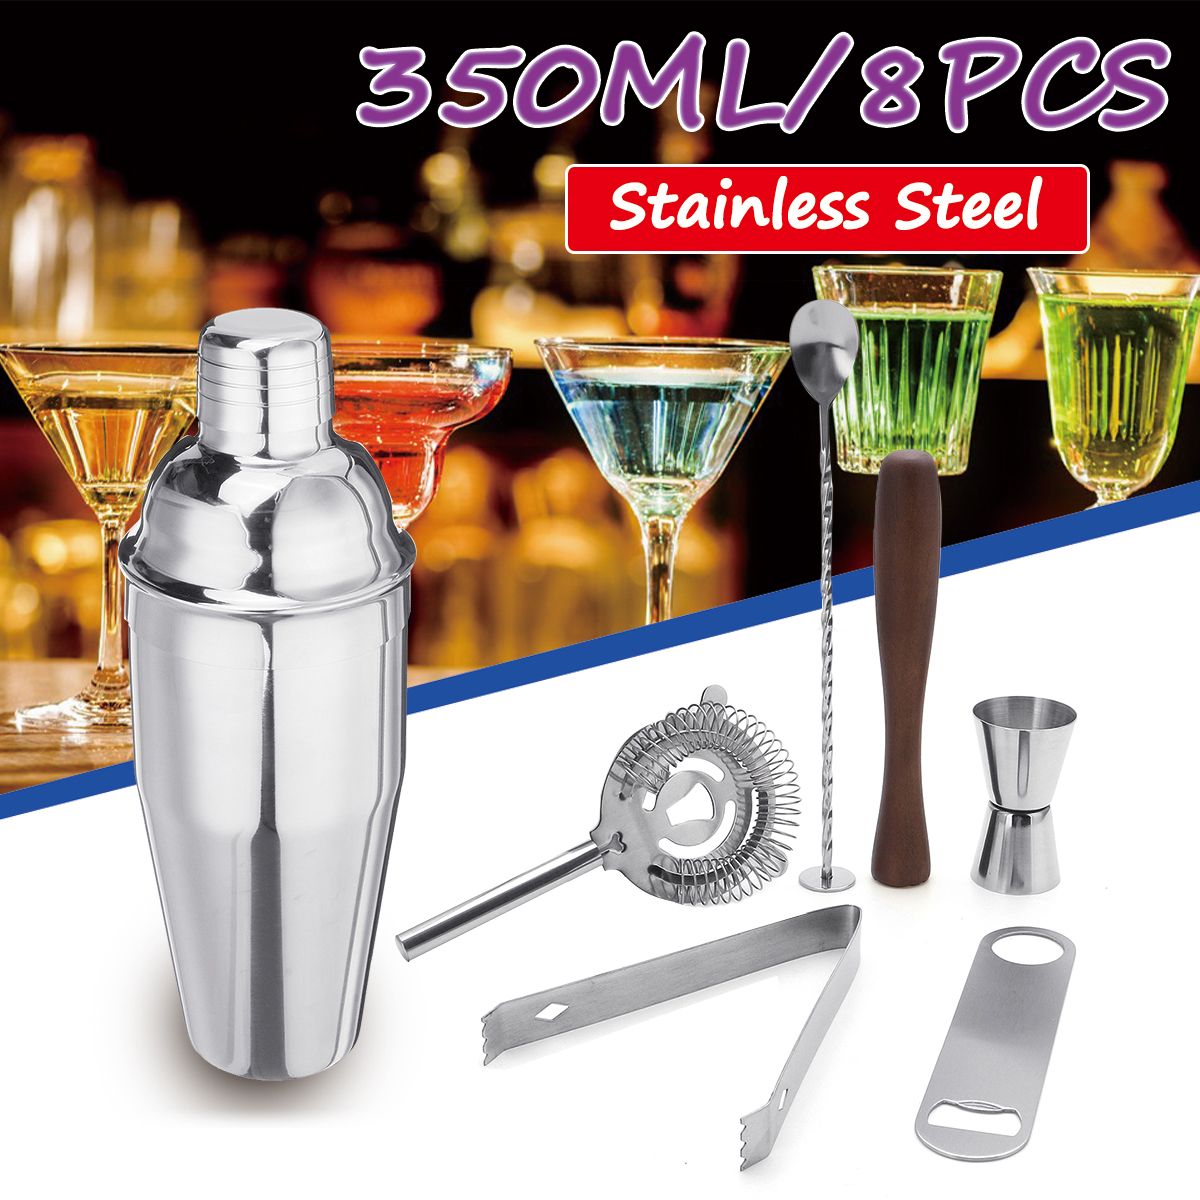 8Pcs--Stainless-Steel-Cocktail-Shaker-Drink-Mixing-Bartender-Mixer-Bar-Kit-Tools-1521972